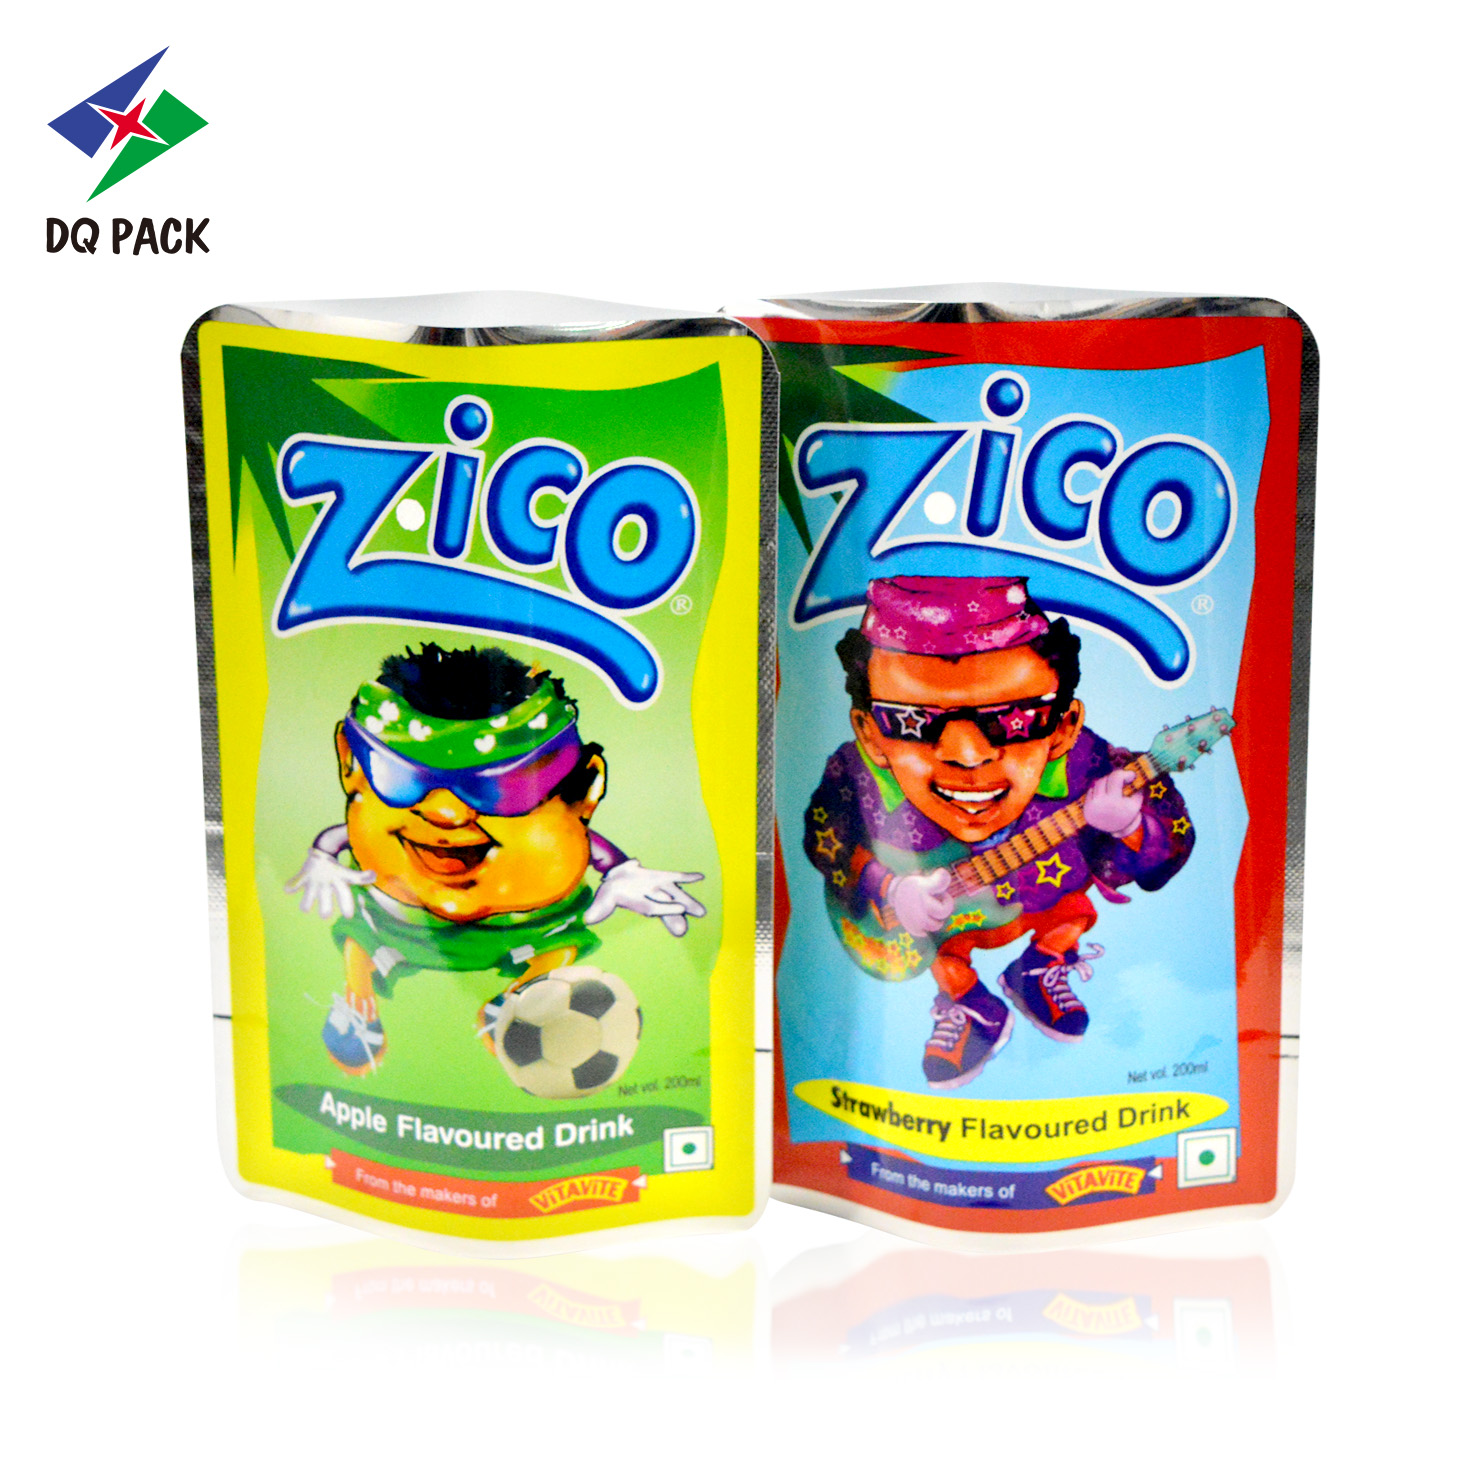 DQ PACK Custom Print Mylar Bag Juice Plastic Heat Seal Packaging Bag Stand up Perforated Pouch for Liquid Packaging